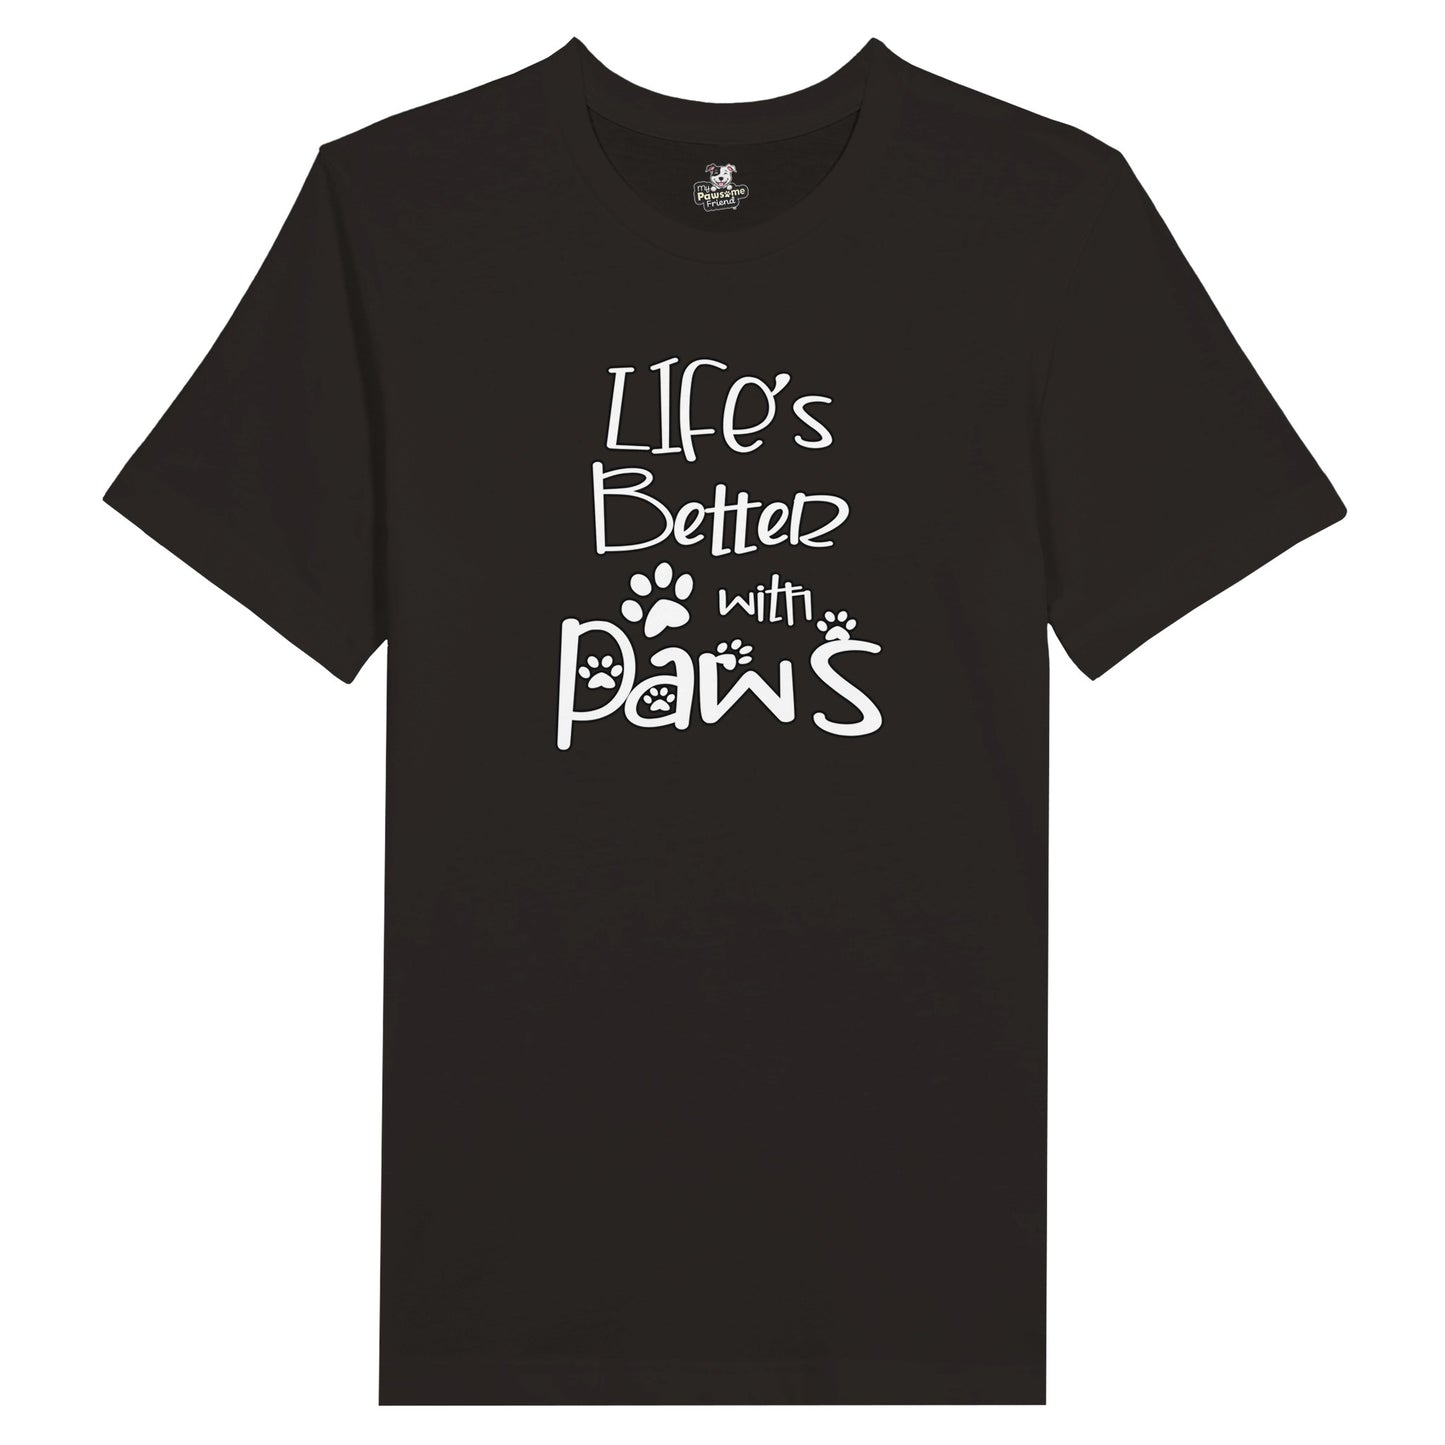 A black t shirt with the design: "Life's better with paws"